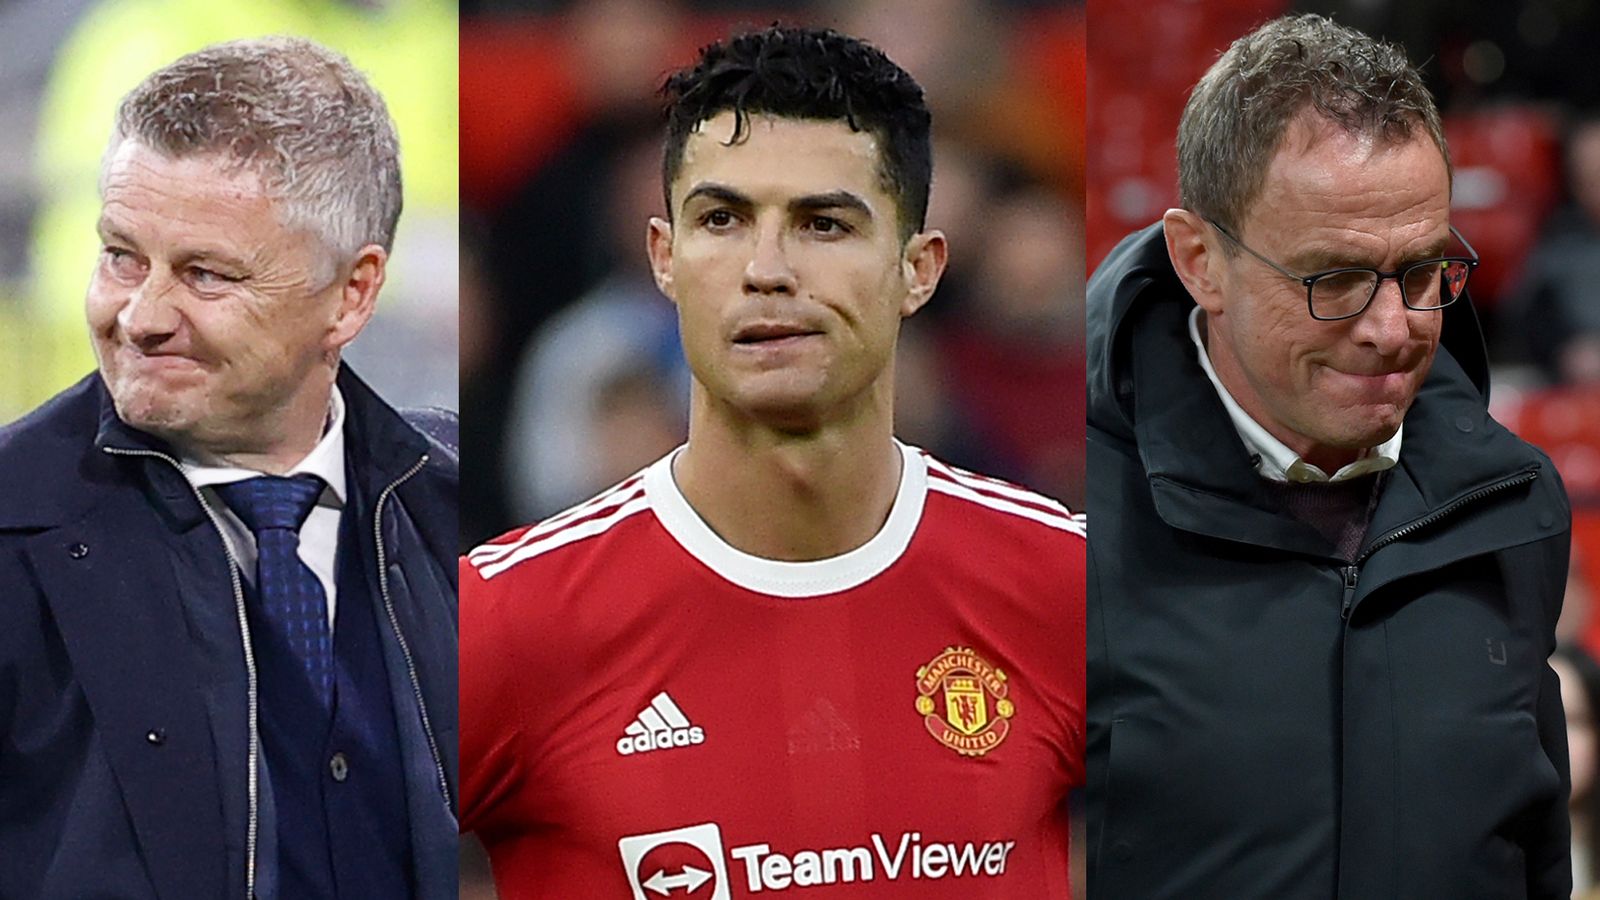 Manchester United suffer worst trophy drought in 40 years after Champions League..